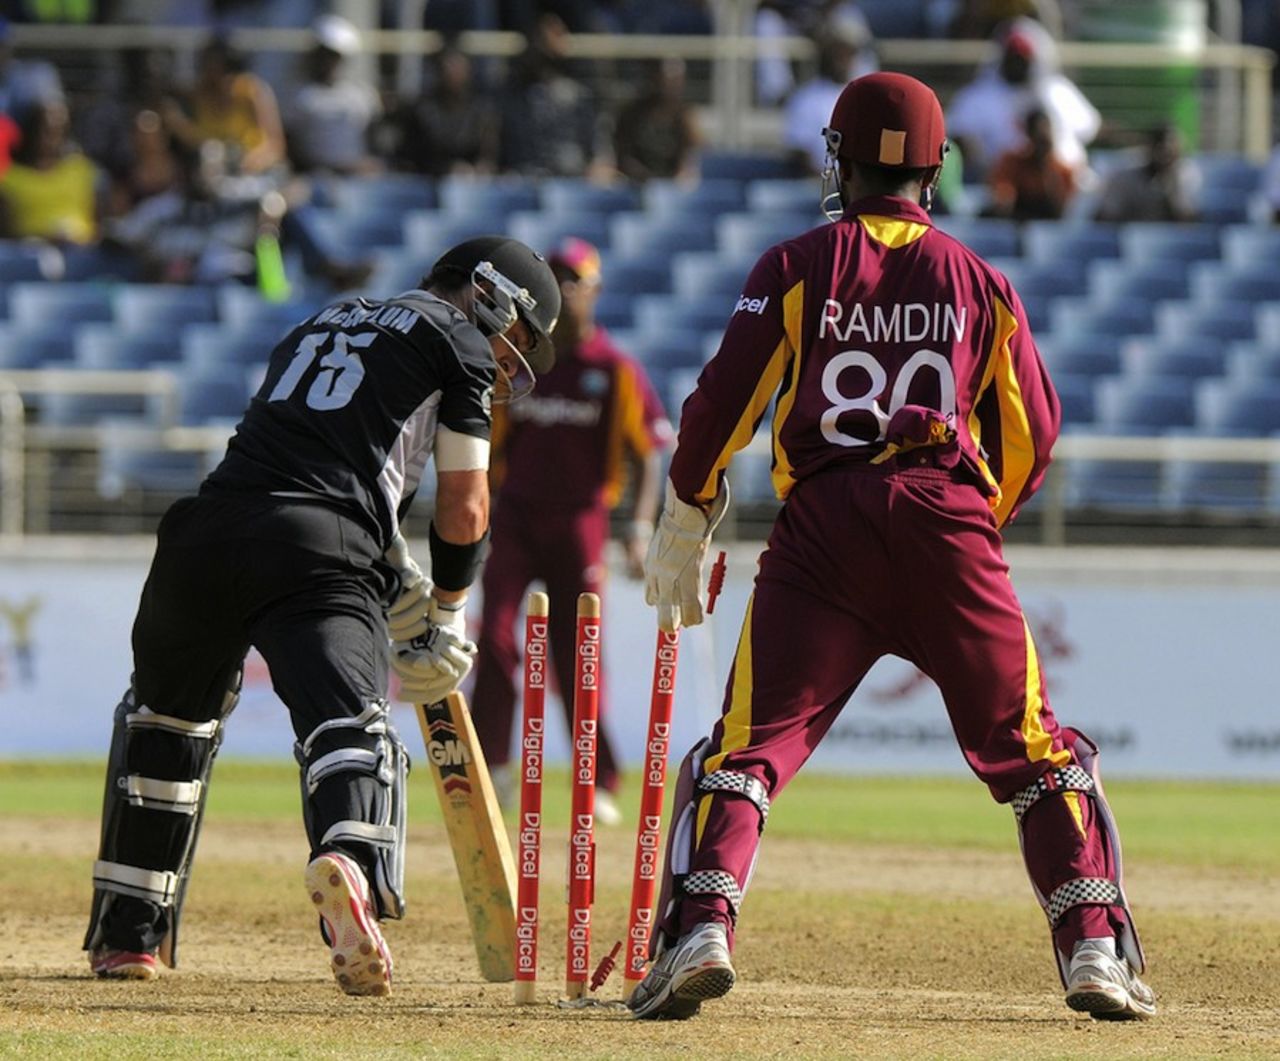 Nathan McCullum was bowled by Sunil Narine, West Indies v New Zealand, 2nd ODI, Kingston, July 7, 2012